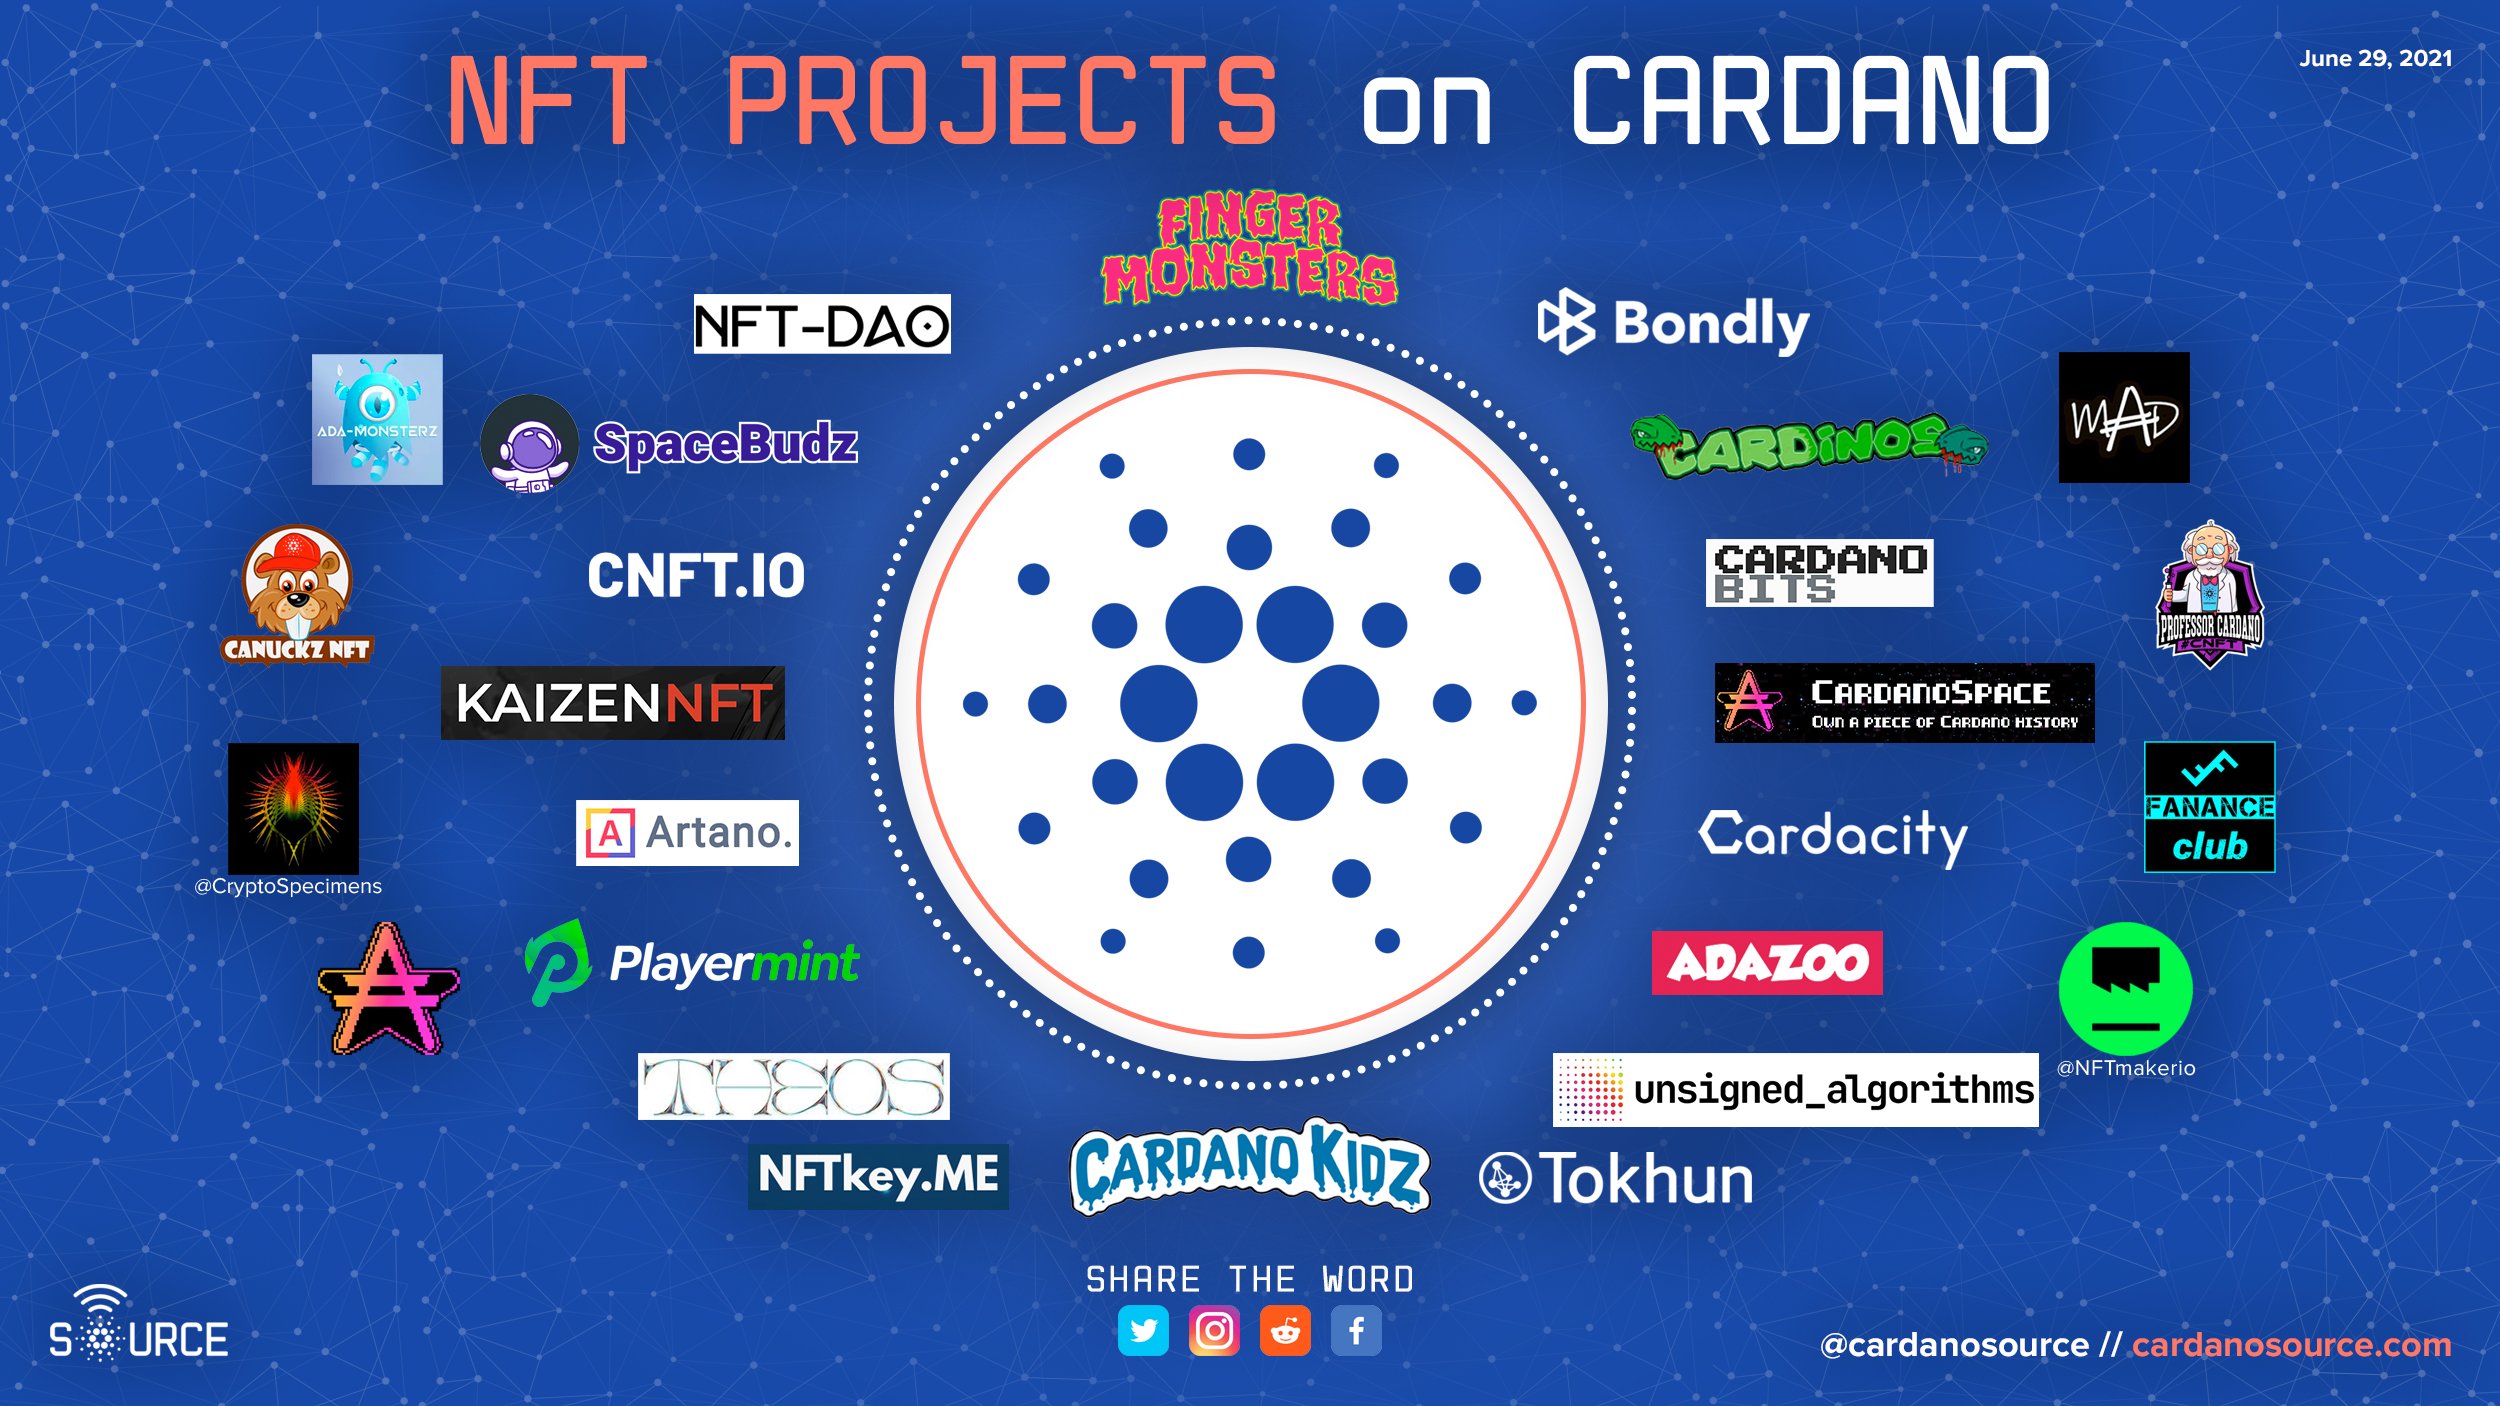 Cardano Source on Twitter: "The growing NFT ecosystem on Cardano 🦾 What  projects have you used or are excited about? Add any projects I missed  below 👇🏽 #CNFT #Cardano https://t.co/Ro4AaQBgeR" / Twitter